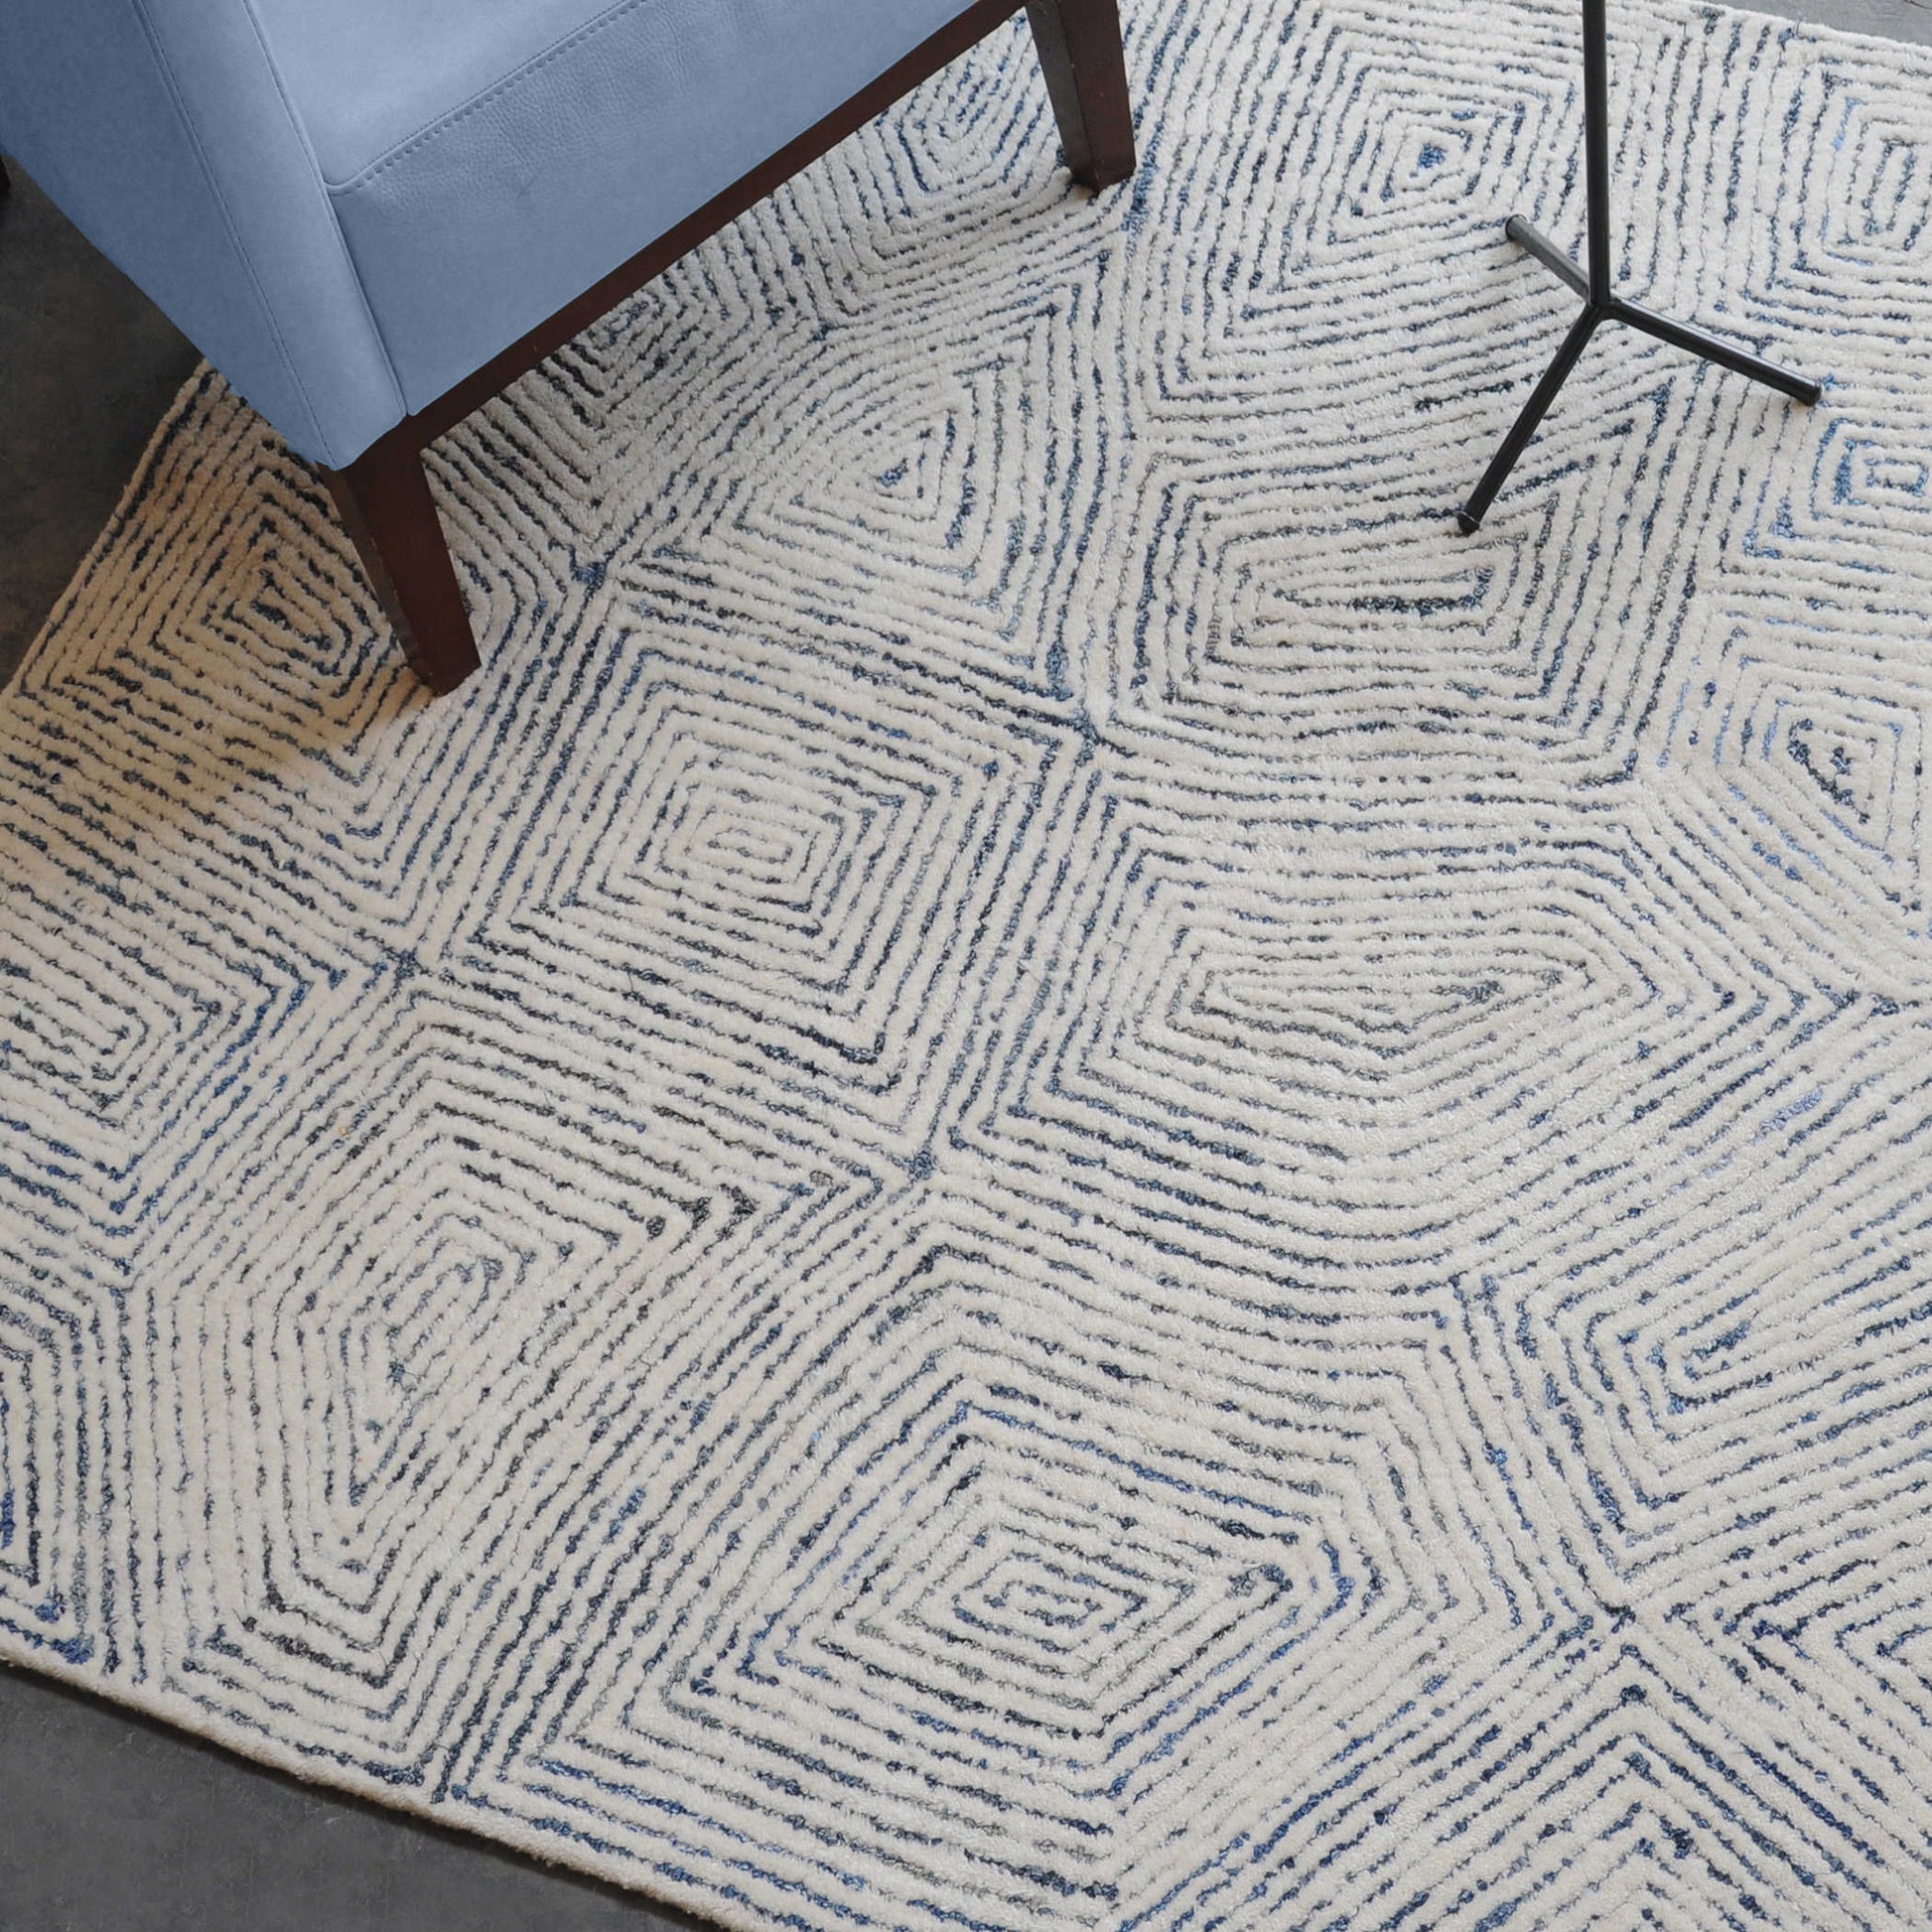 Blue and white alternating lines on a rug with a blue chair and legs of an accent table.